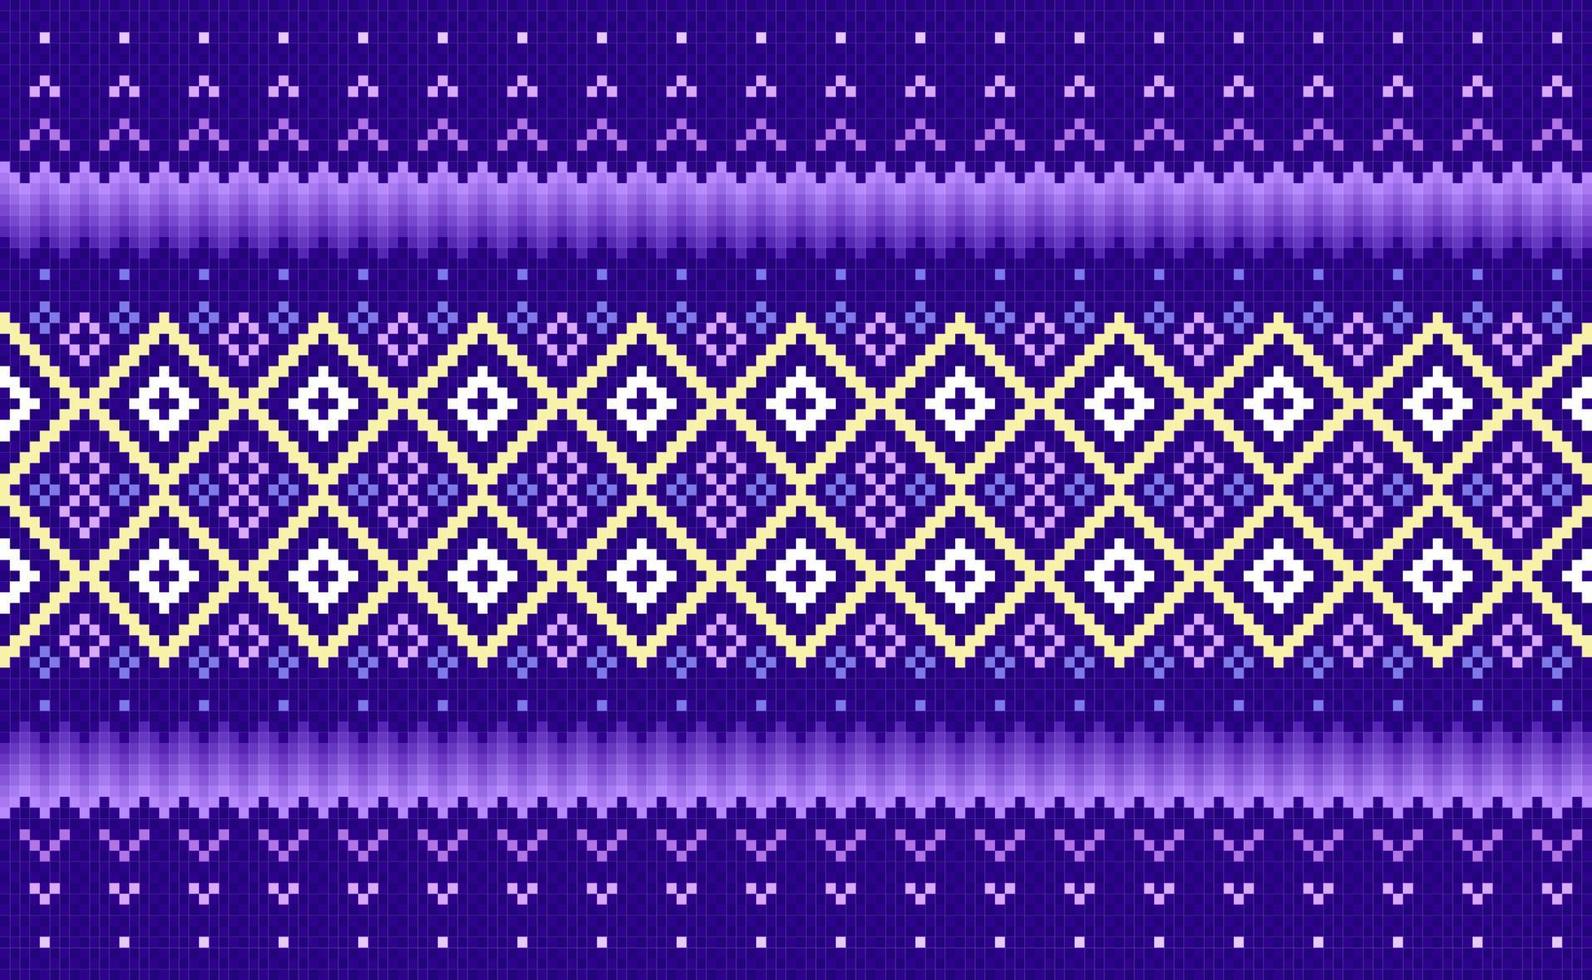 Pixel ethnic pattern, Vector embroidery ornate background, Purple and yellow pattern knitting continuous